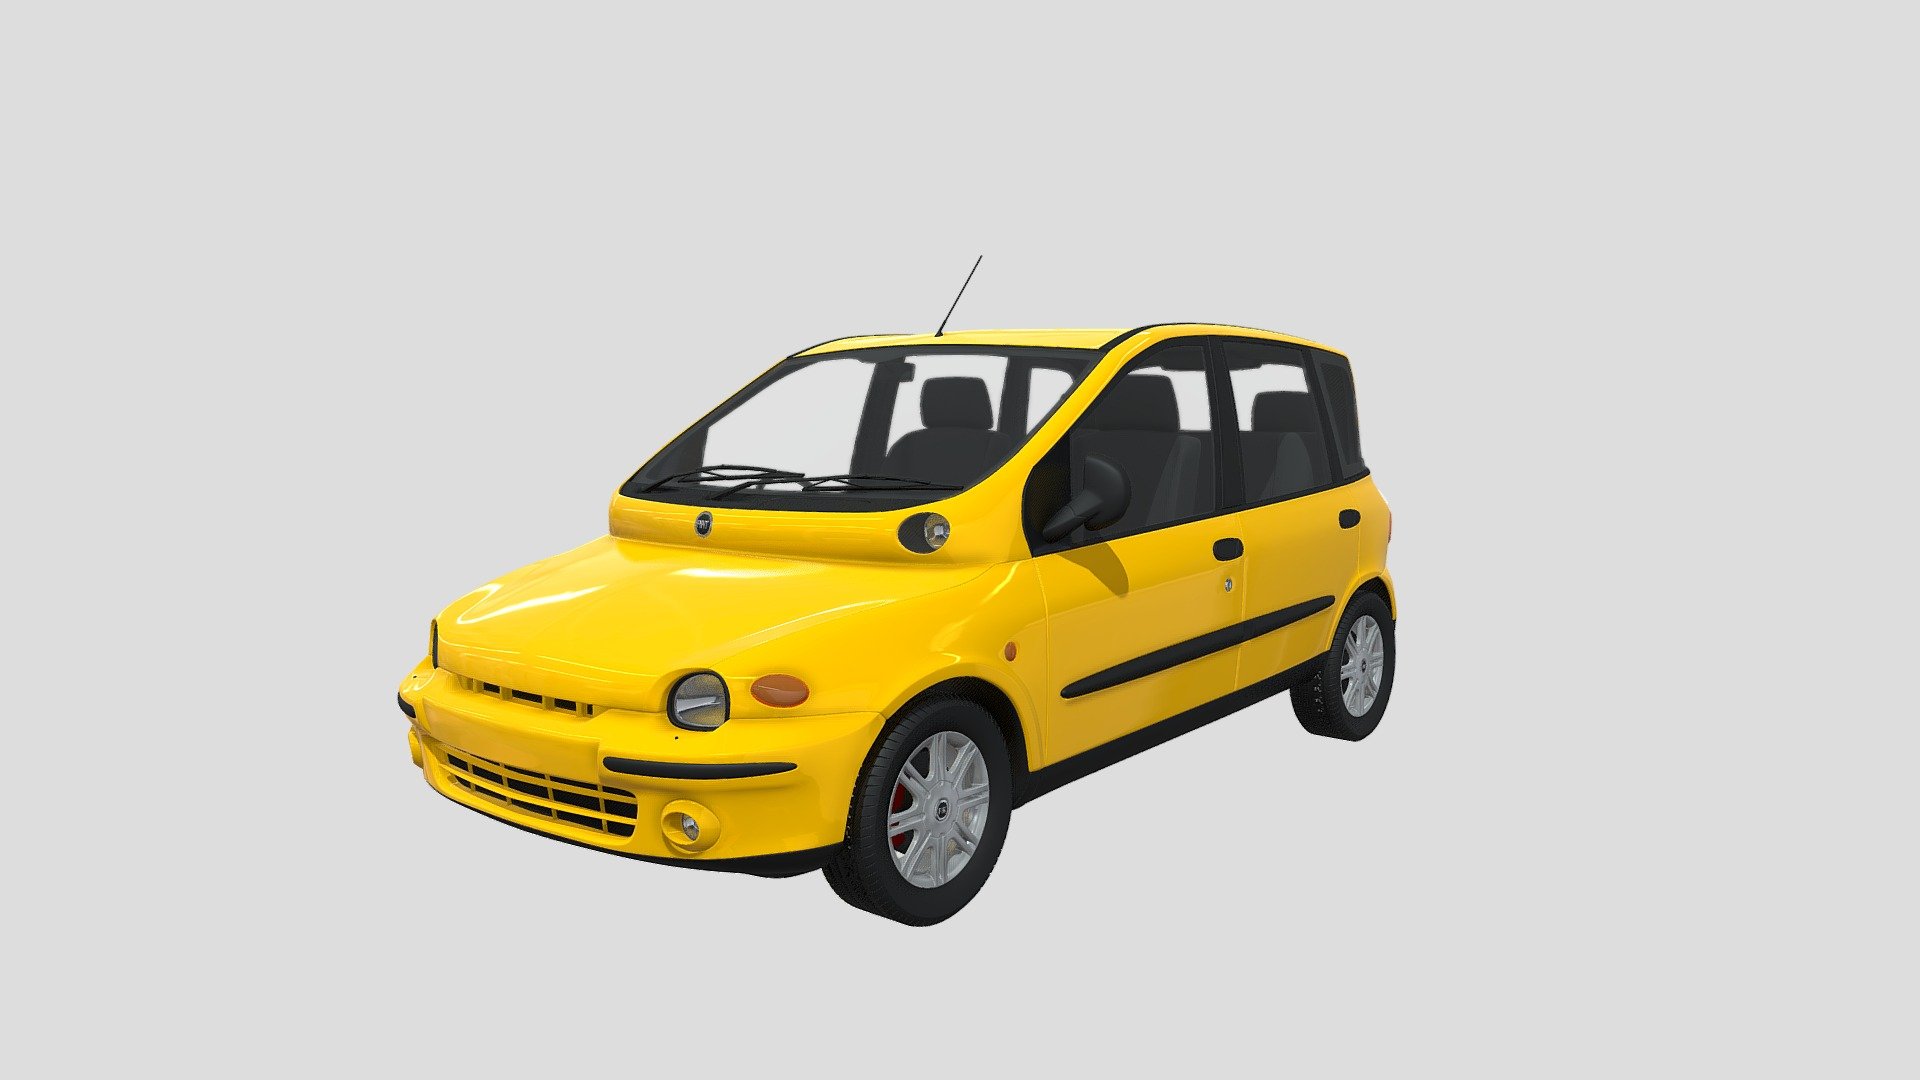 High resolution,realistic, fully detailed and textured exterior of a car - Fiat Multipla 1998 Car Rigged .
Modeled in Blender

If you like this model I would appreciate if you rate it.
Also check out my other models, just click on my user name to see complete gallery 3d model